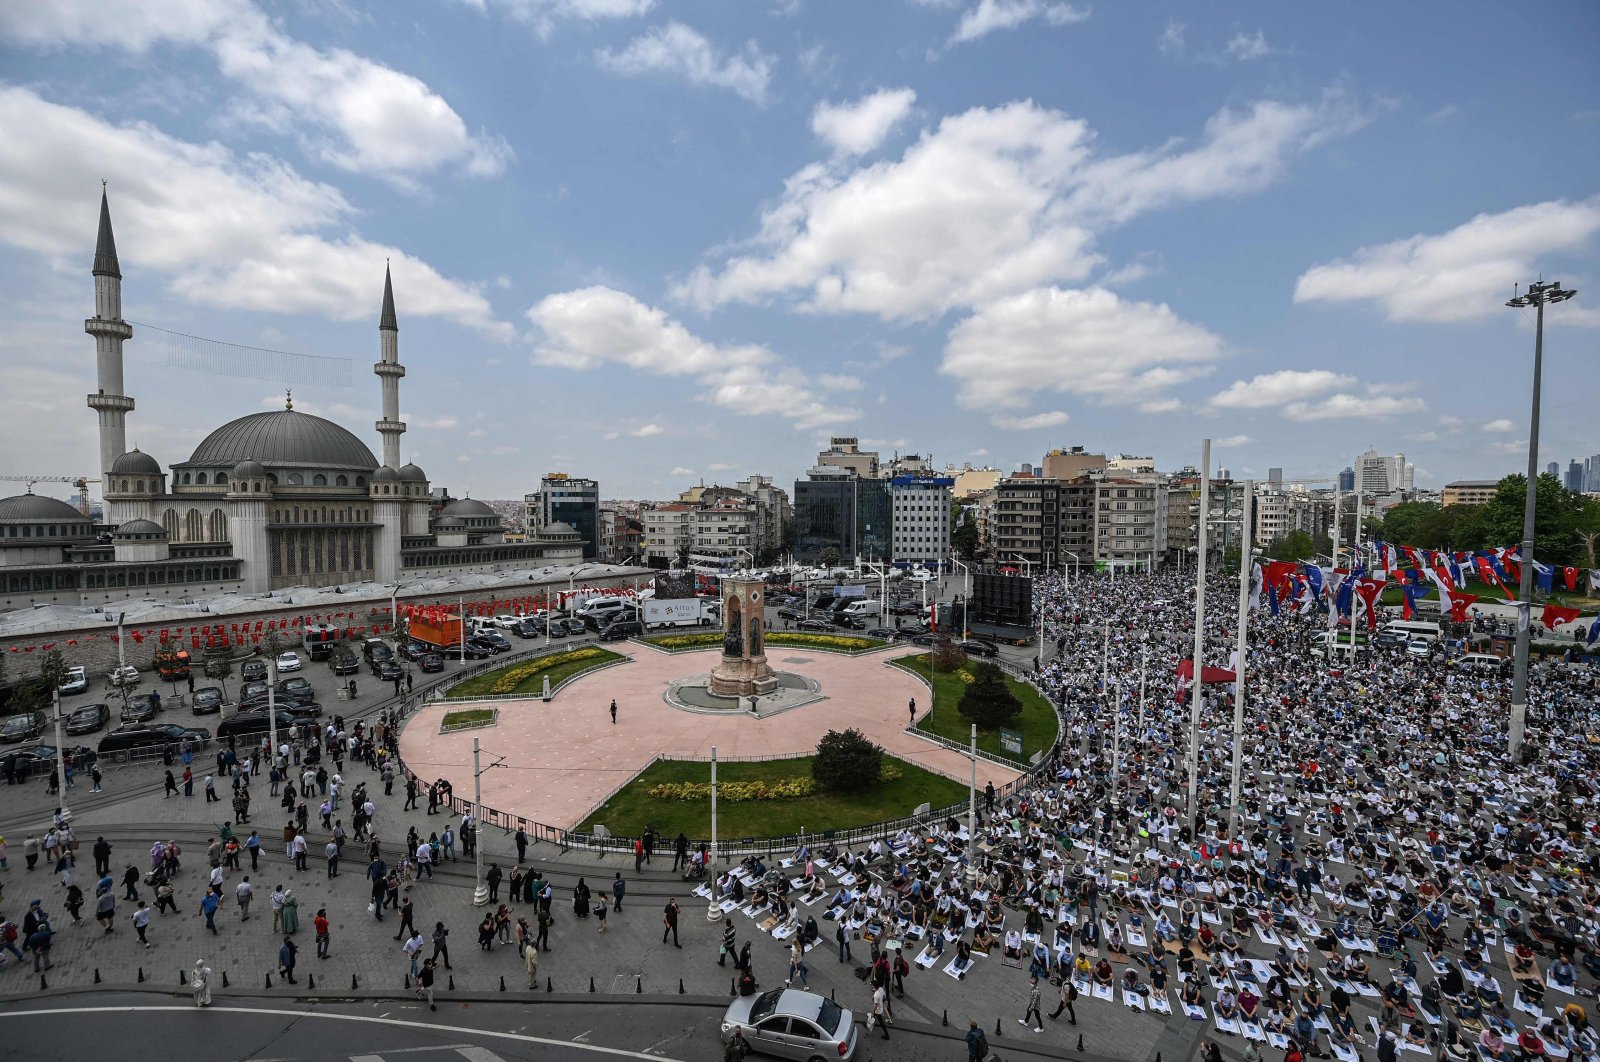 Istanbul’s Taksim Mosque opens after decades of legal wrangling